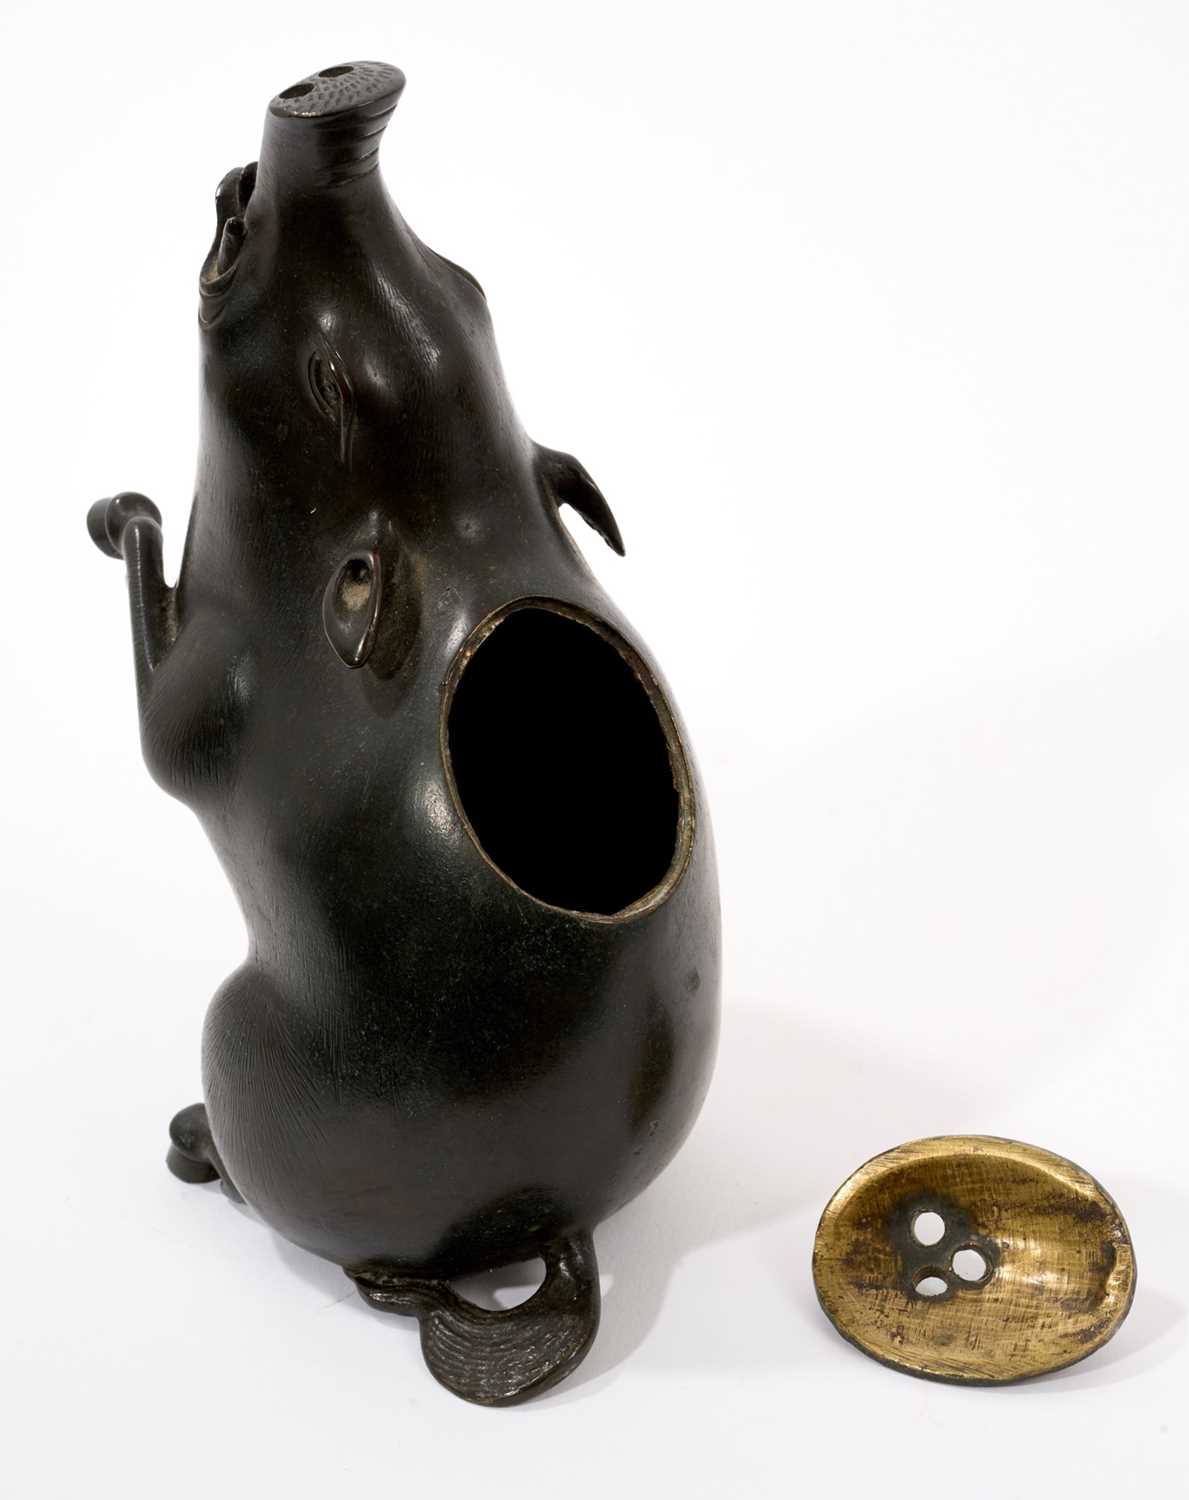 19th century Japanese bronze censer in the form of a seated boar - Image 2 of 9